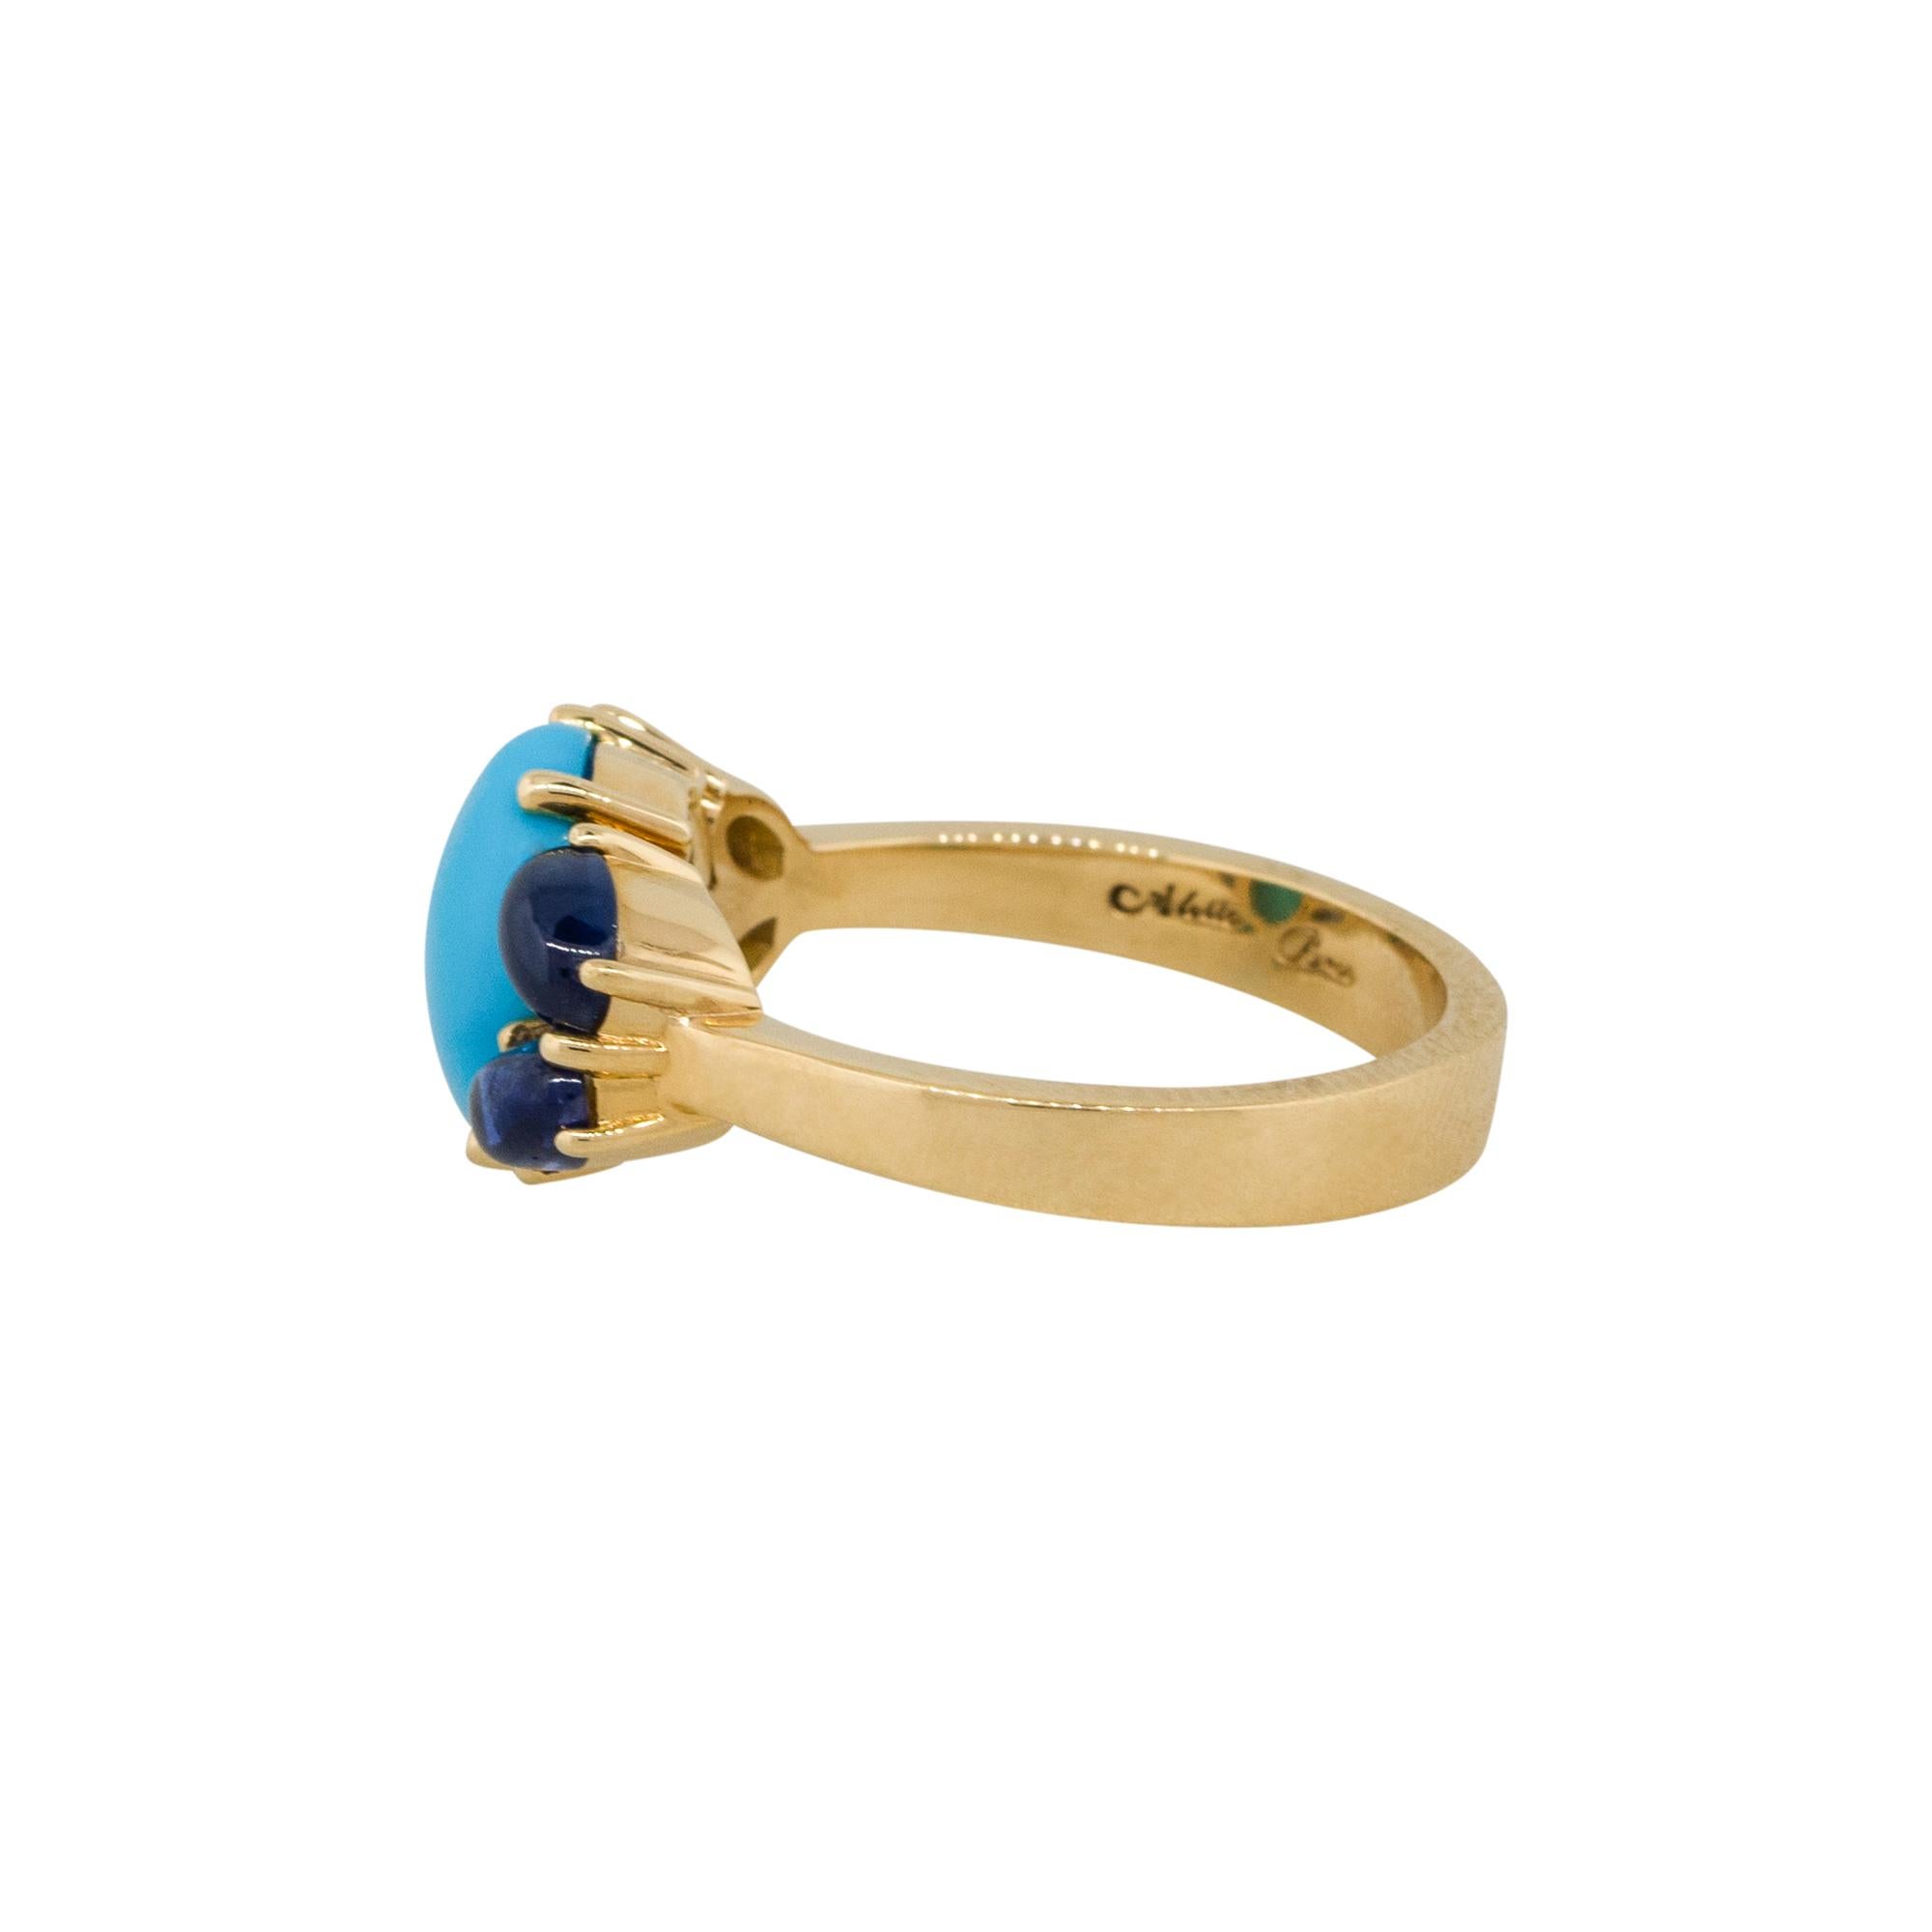 Material: 18k Yellow Gold 
Gemstone details: Approx. 1.60ct oval Sapphire gemstones
                               Oval Turquoise Cabochon
Ring Size: 7
Ring Measurements: 0.90